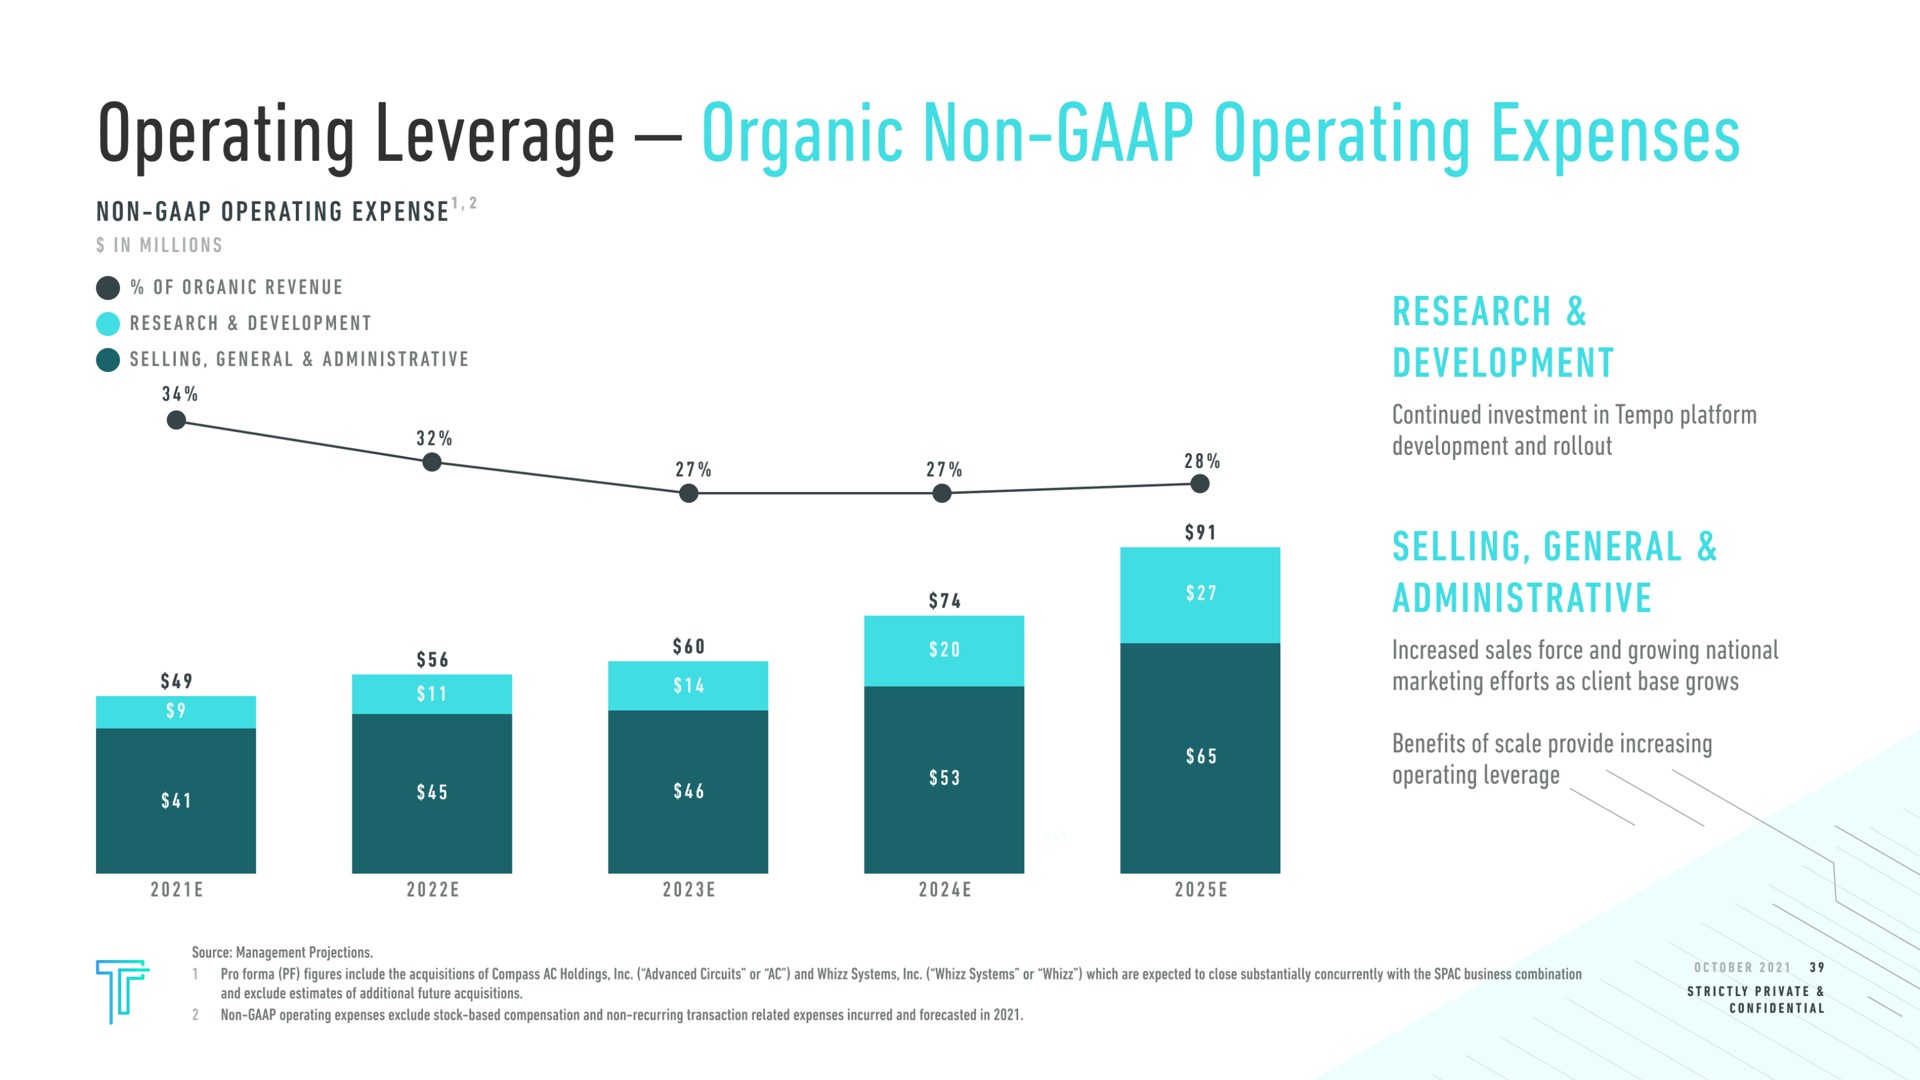 operating leverage organic non operating expenses non operating expense in millions research development selling general administrative research development continued investment in tempo platform development and selling general administrative increased sales force and growing national marketing efforts as client base grows benefits of scale provide increasing operating leverage | Tempo